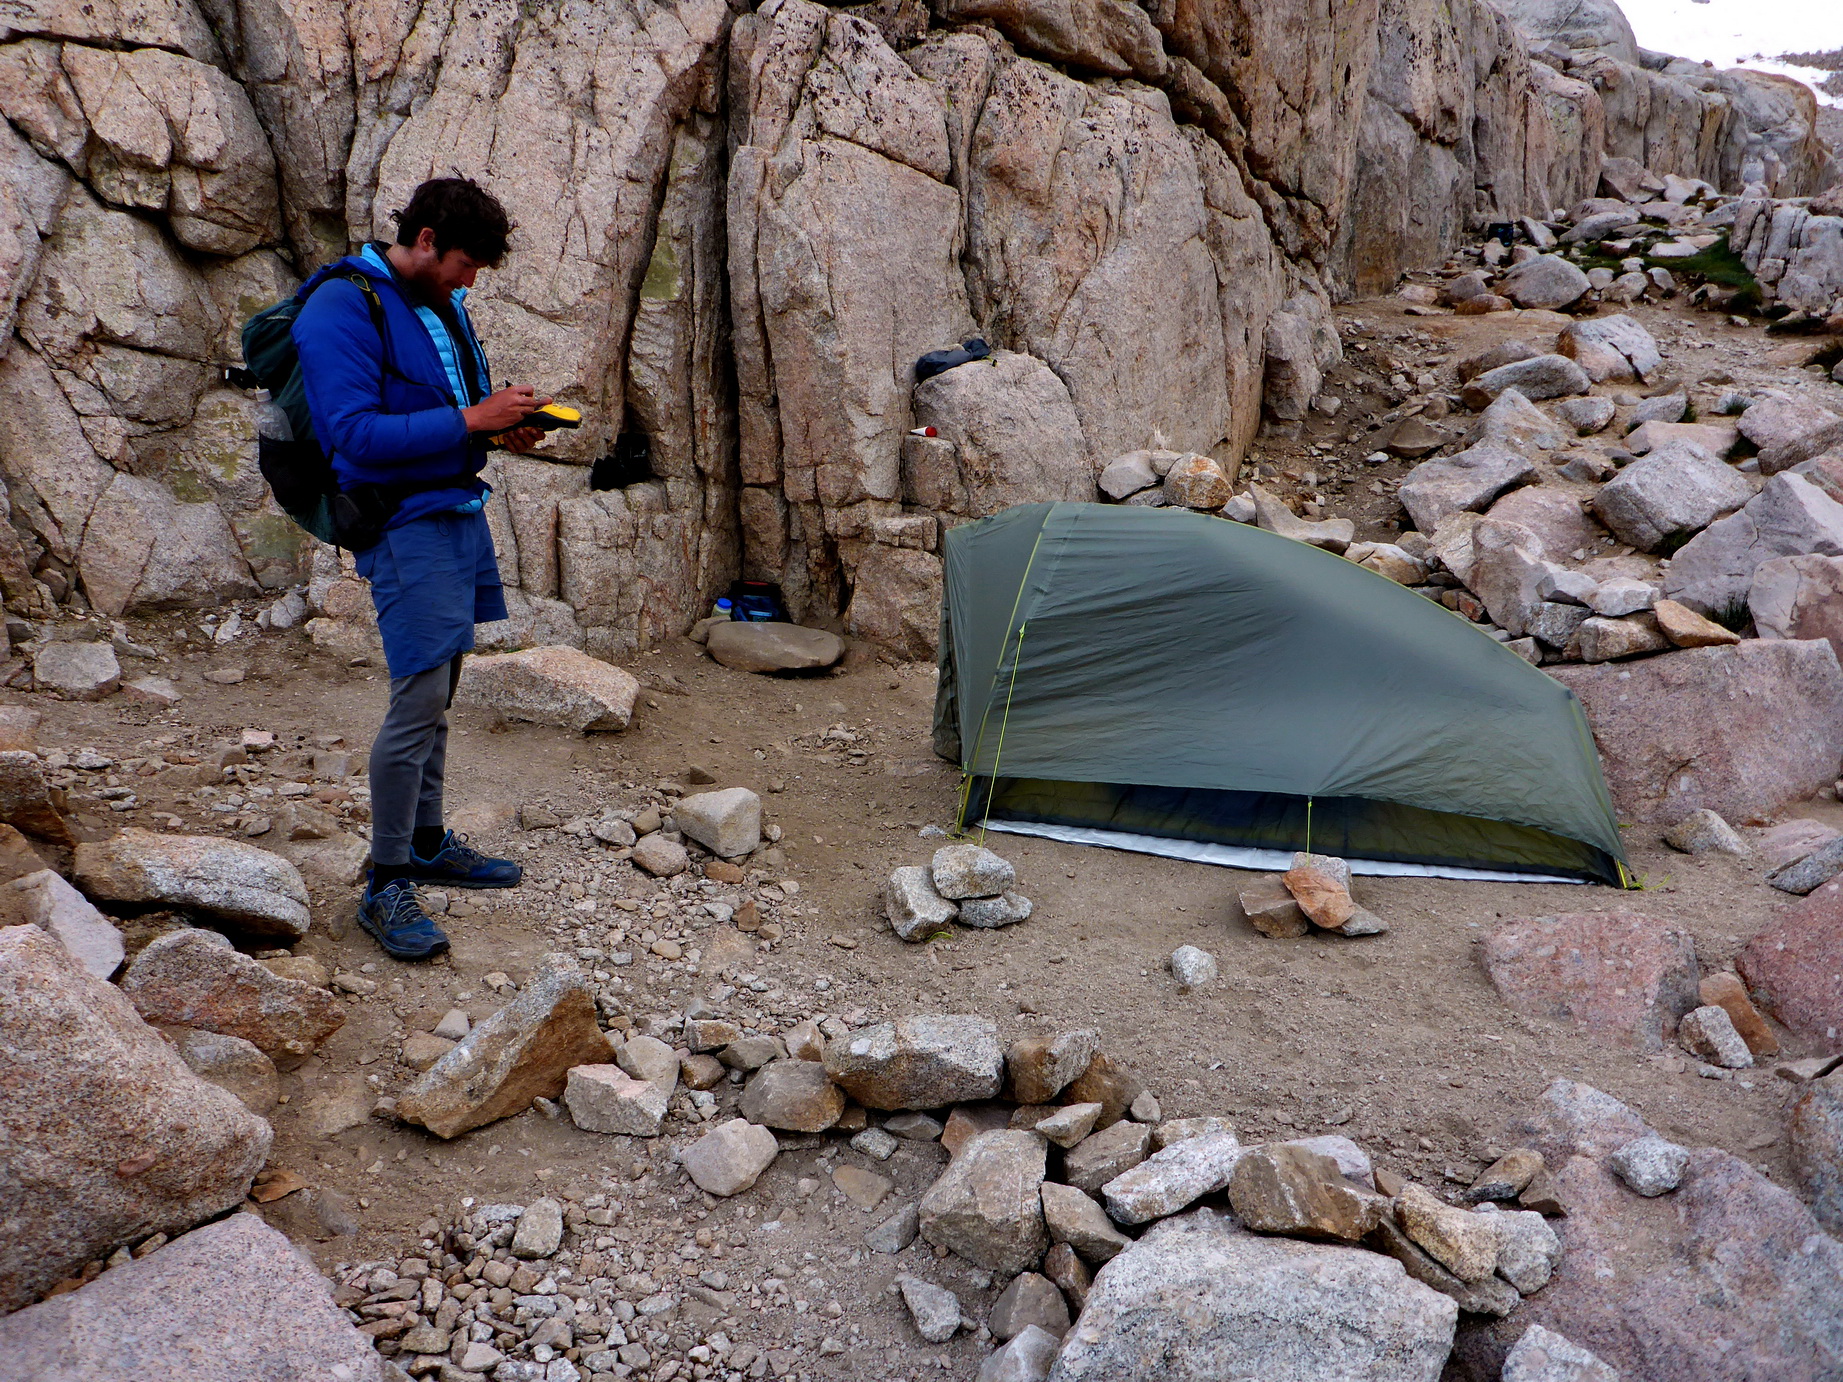 Camping near water bodies in wilderness: sustainable camping management strategies 